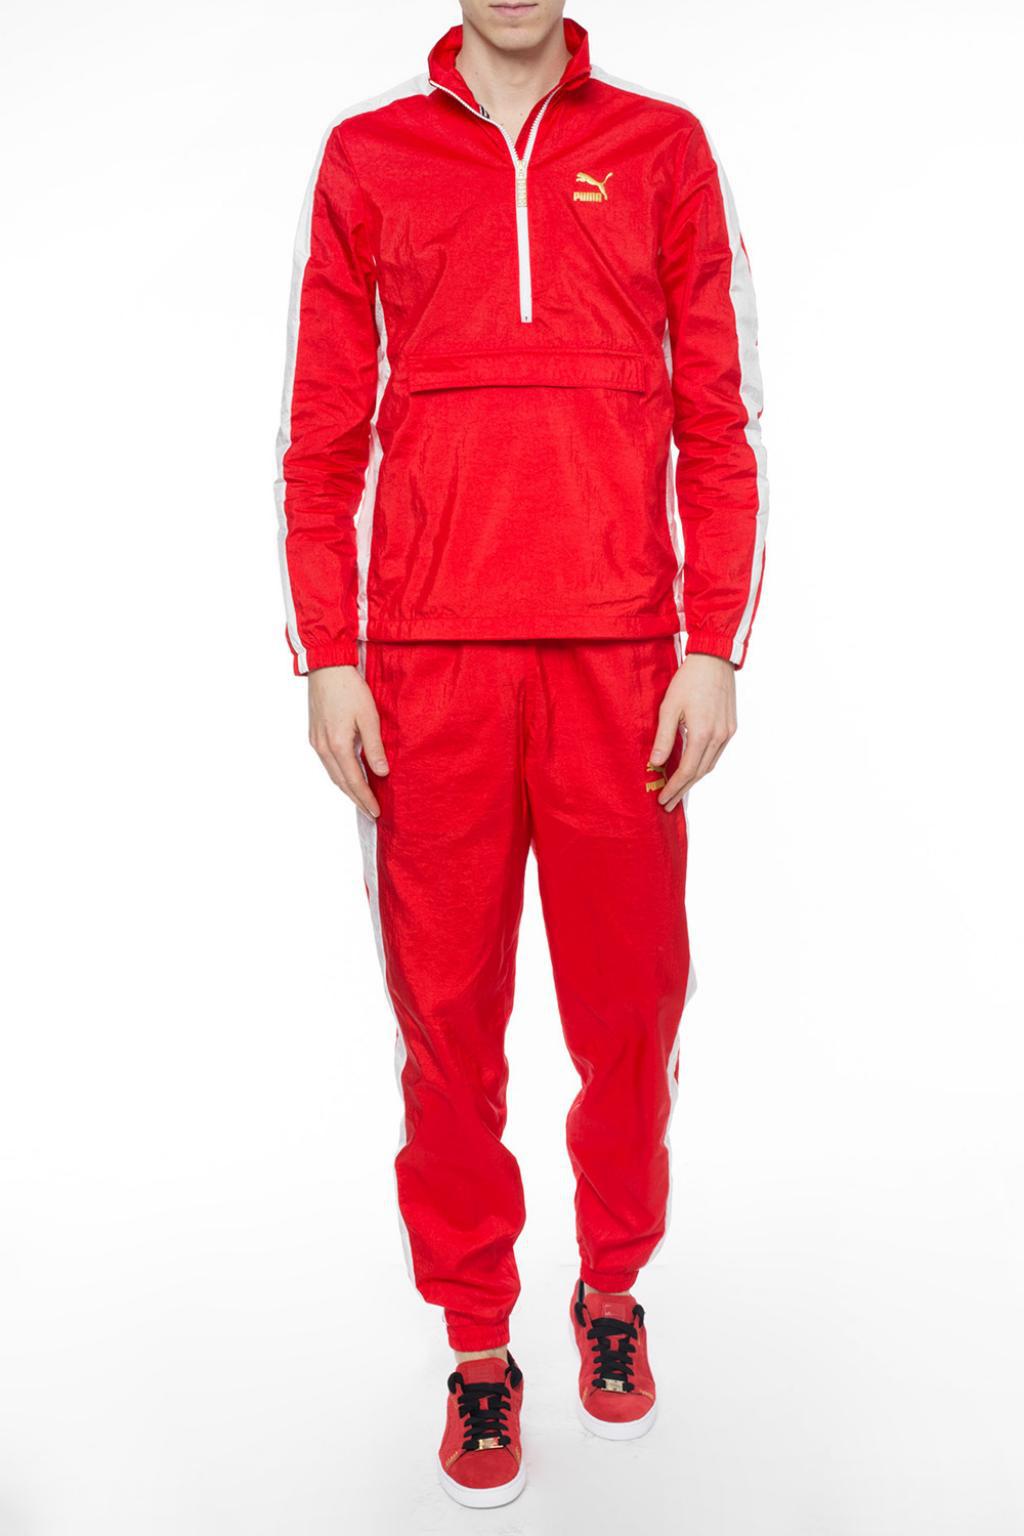 PUMA Synthetic Side-stripe Sweatpants in Red for Men - Lyst